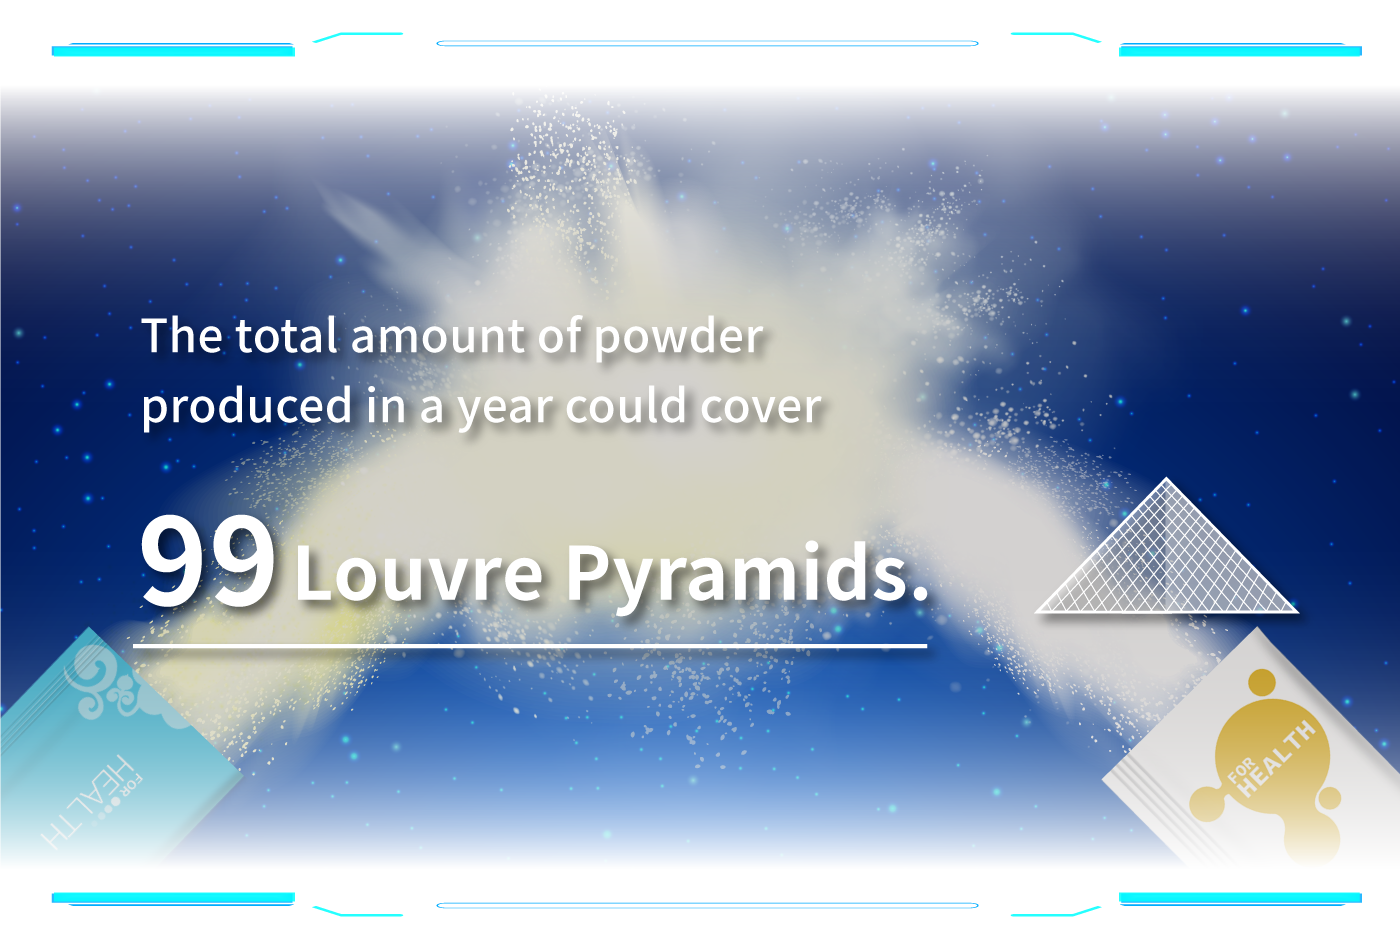 The total amount of powder produced in a year could cover 99 Louvre Pyramids.